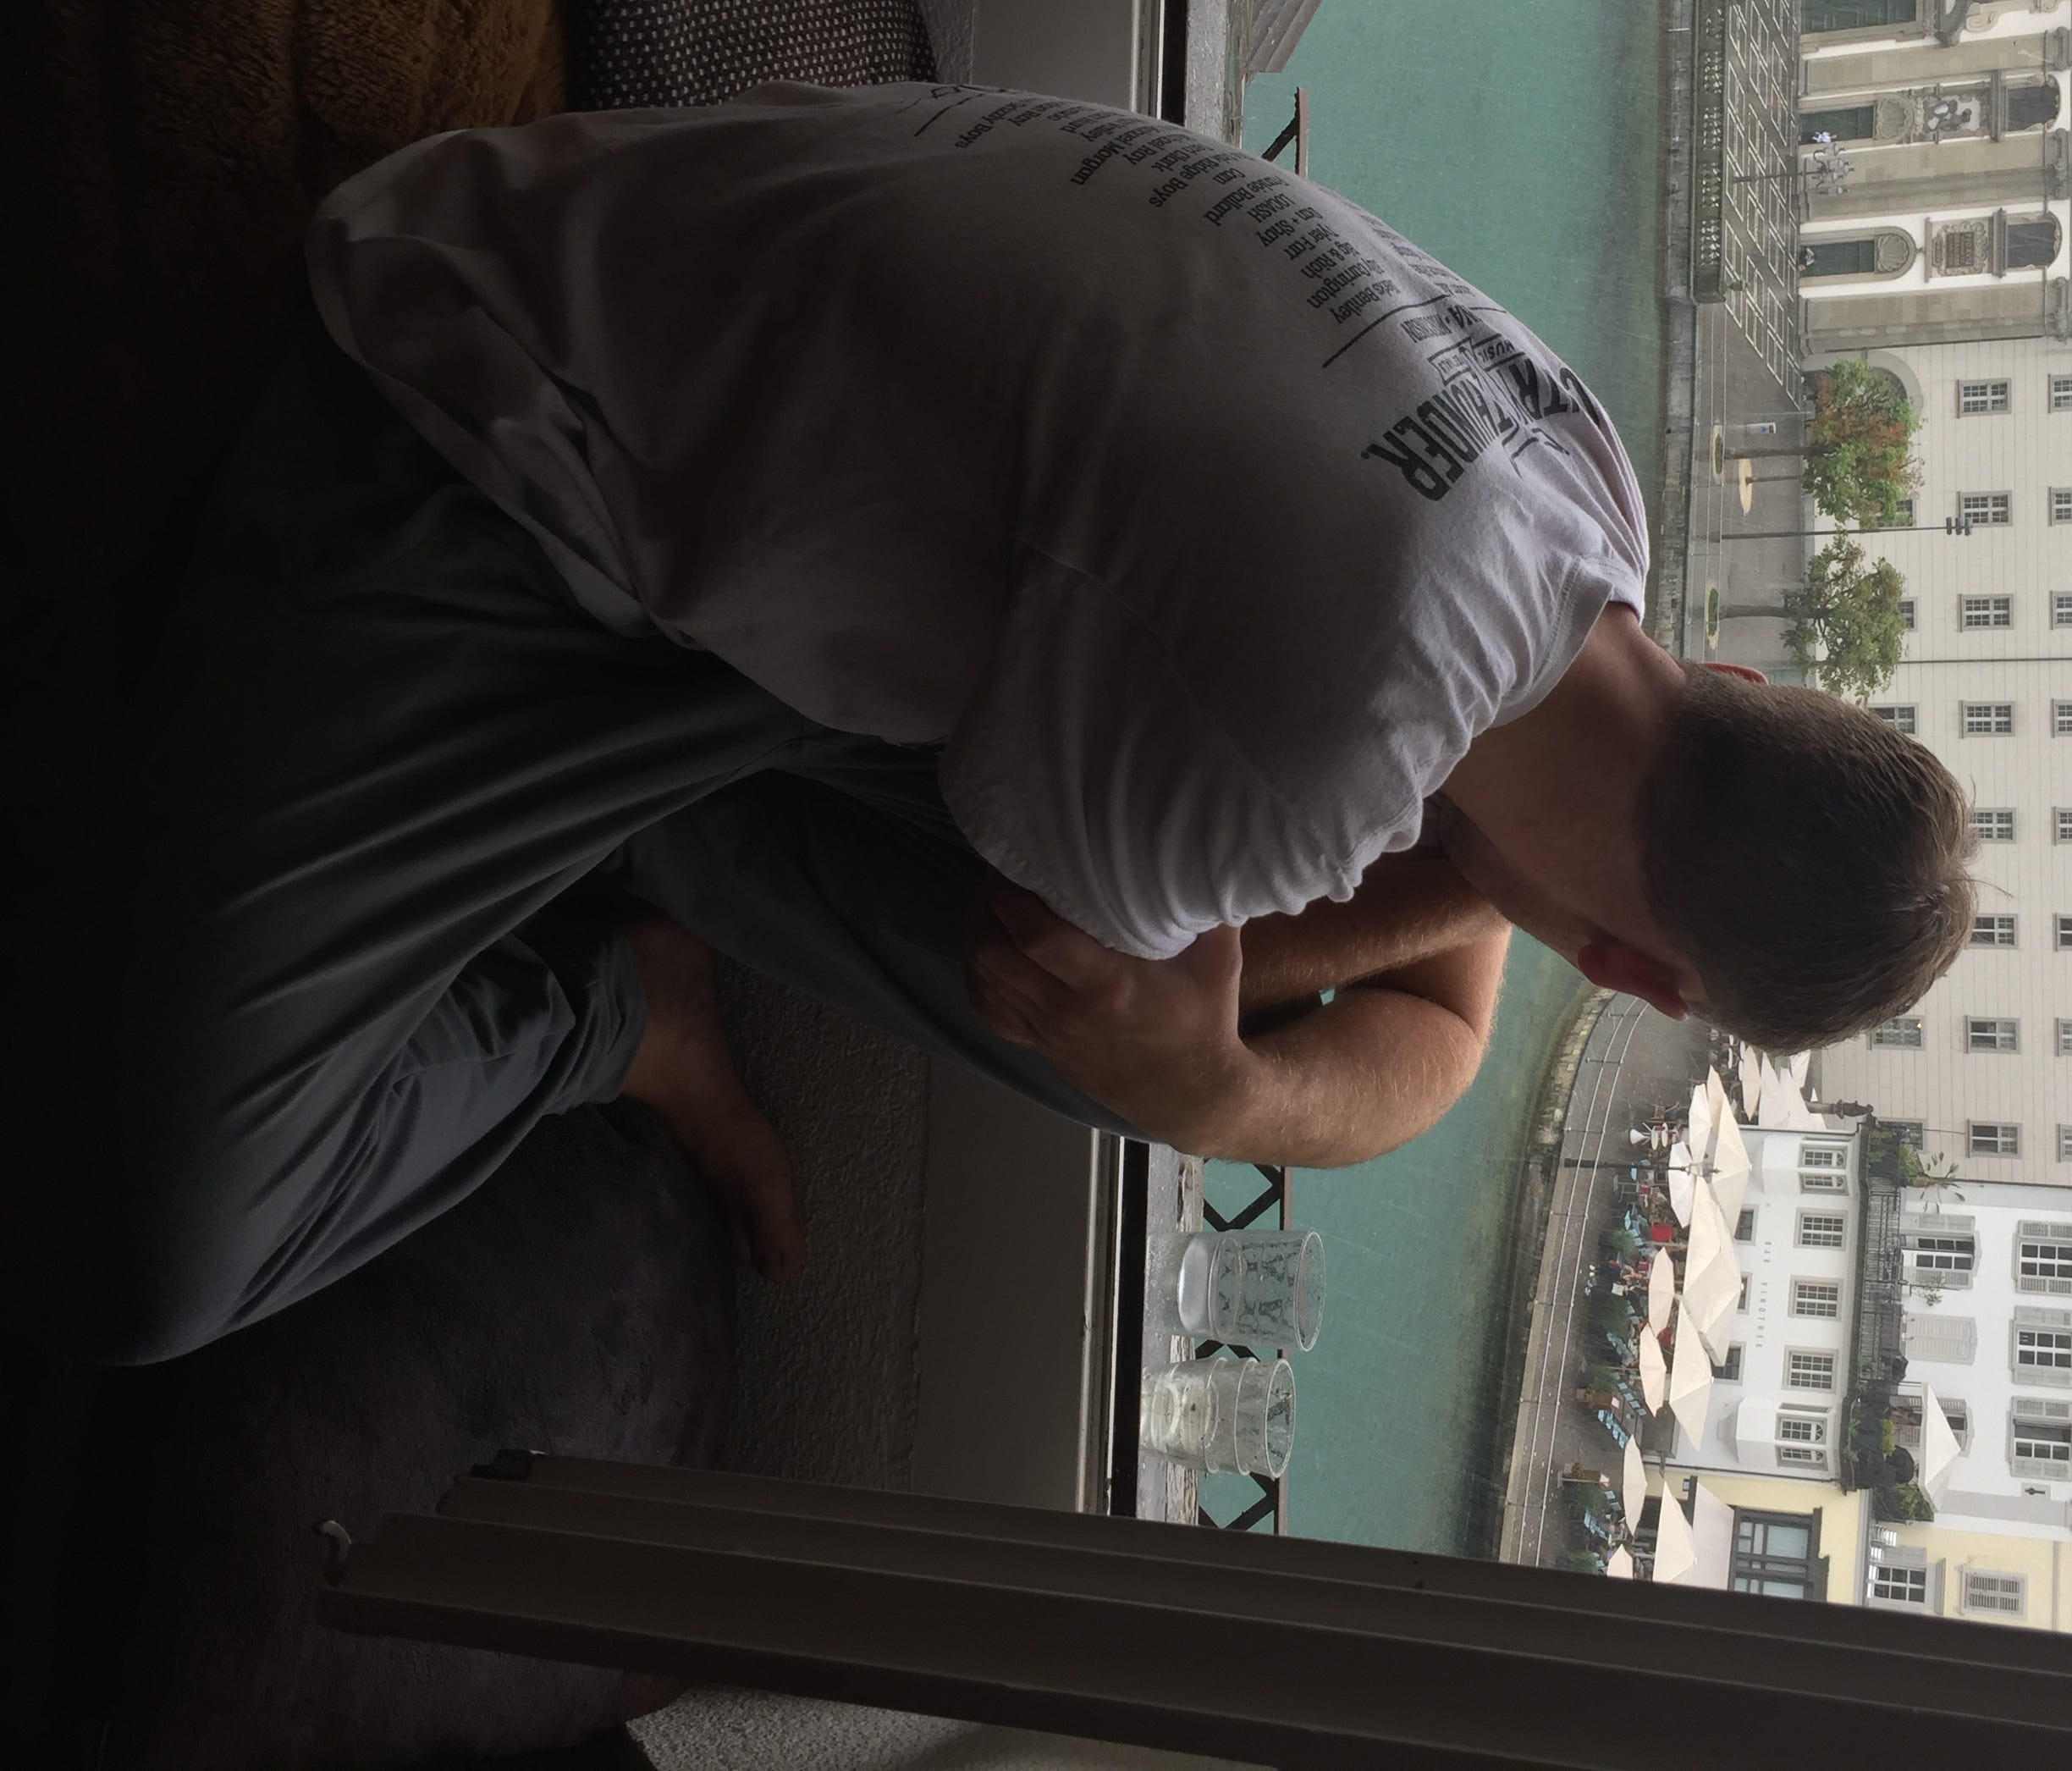 Jack Gilbertson, Dawn's son, takes in the view of Lucerne, Switzerland, from the window nook of their Airbnb rental.